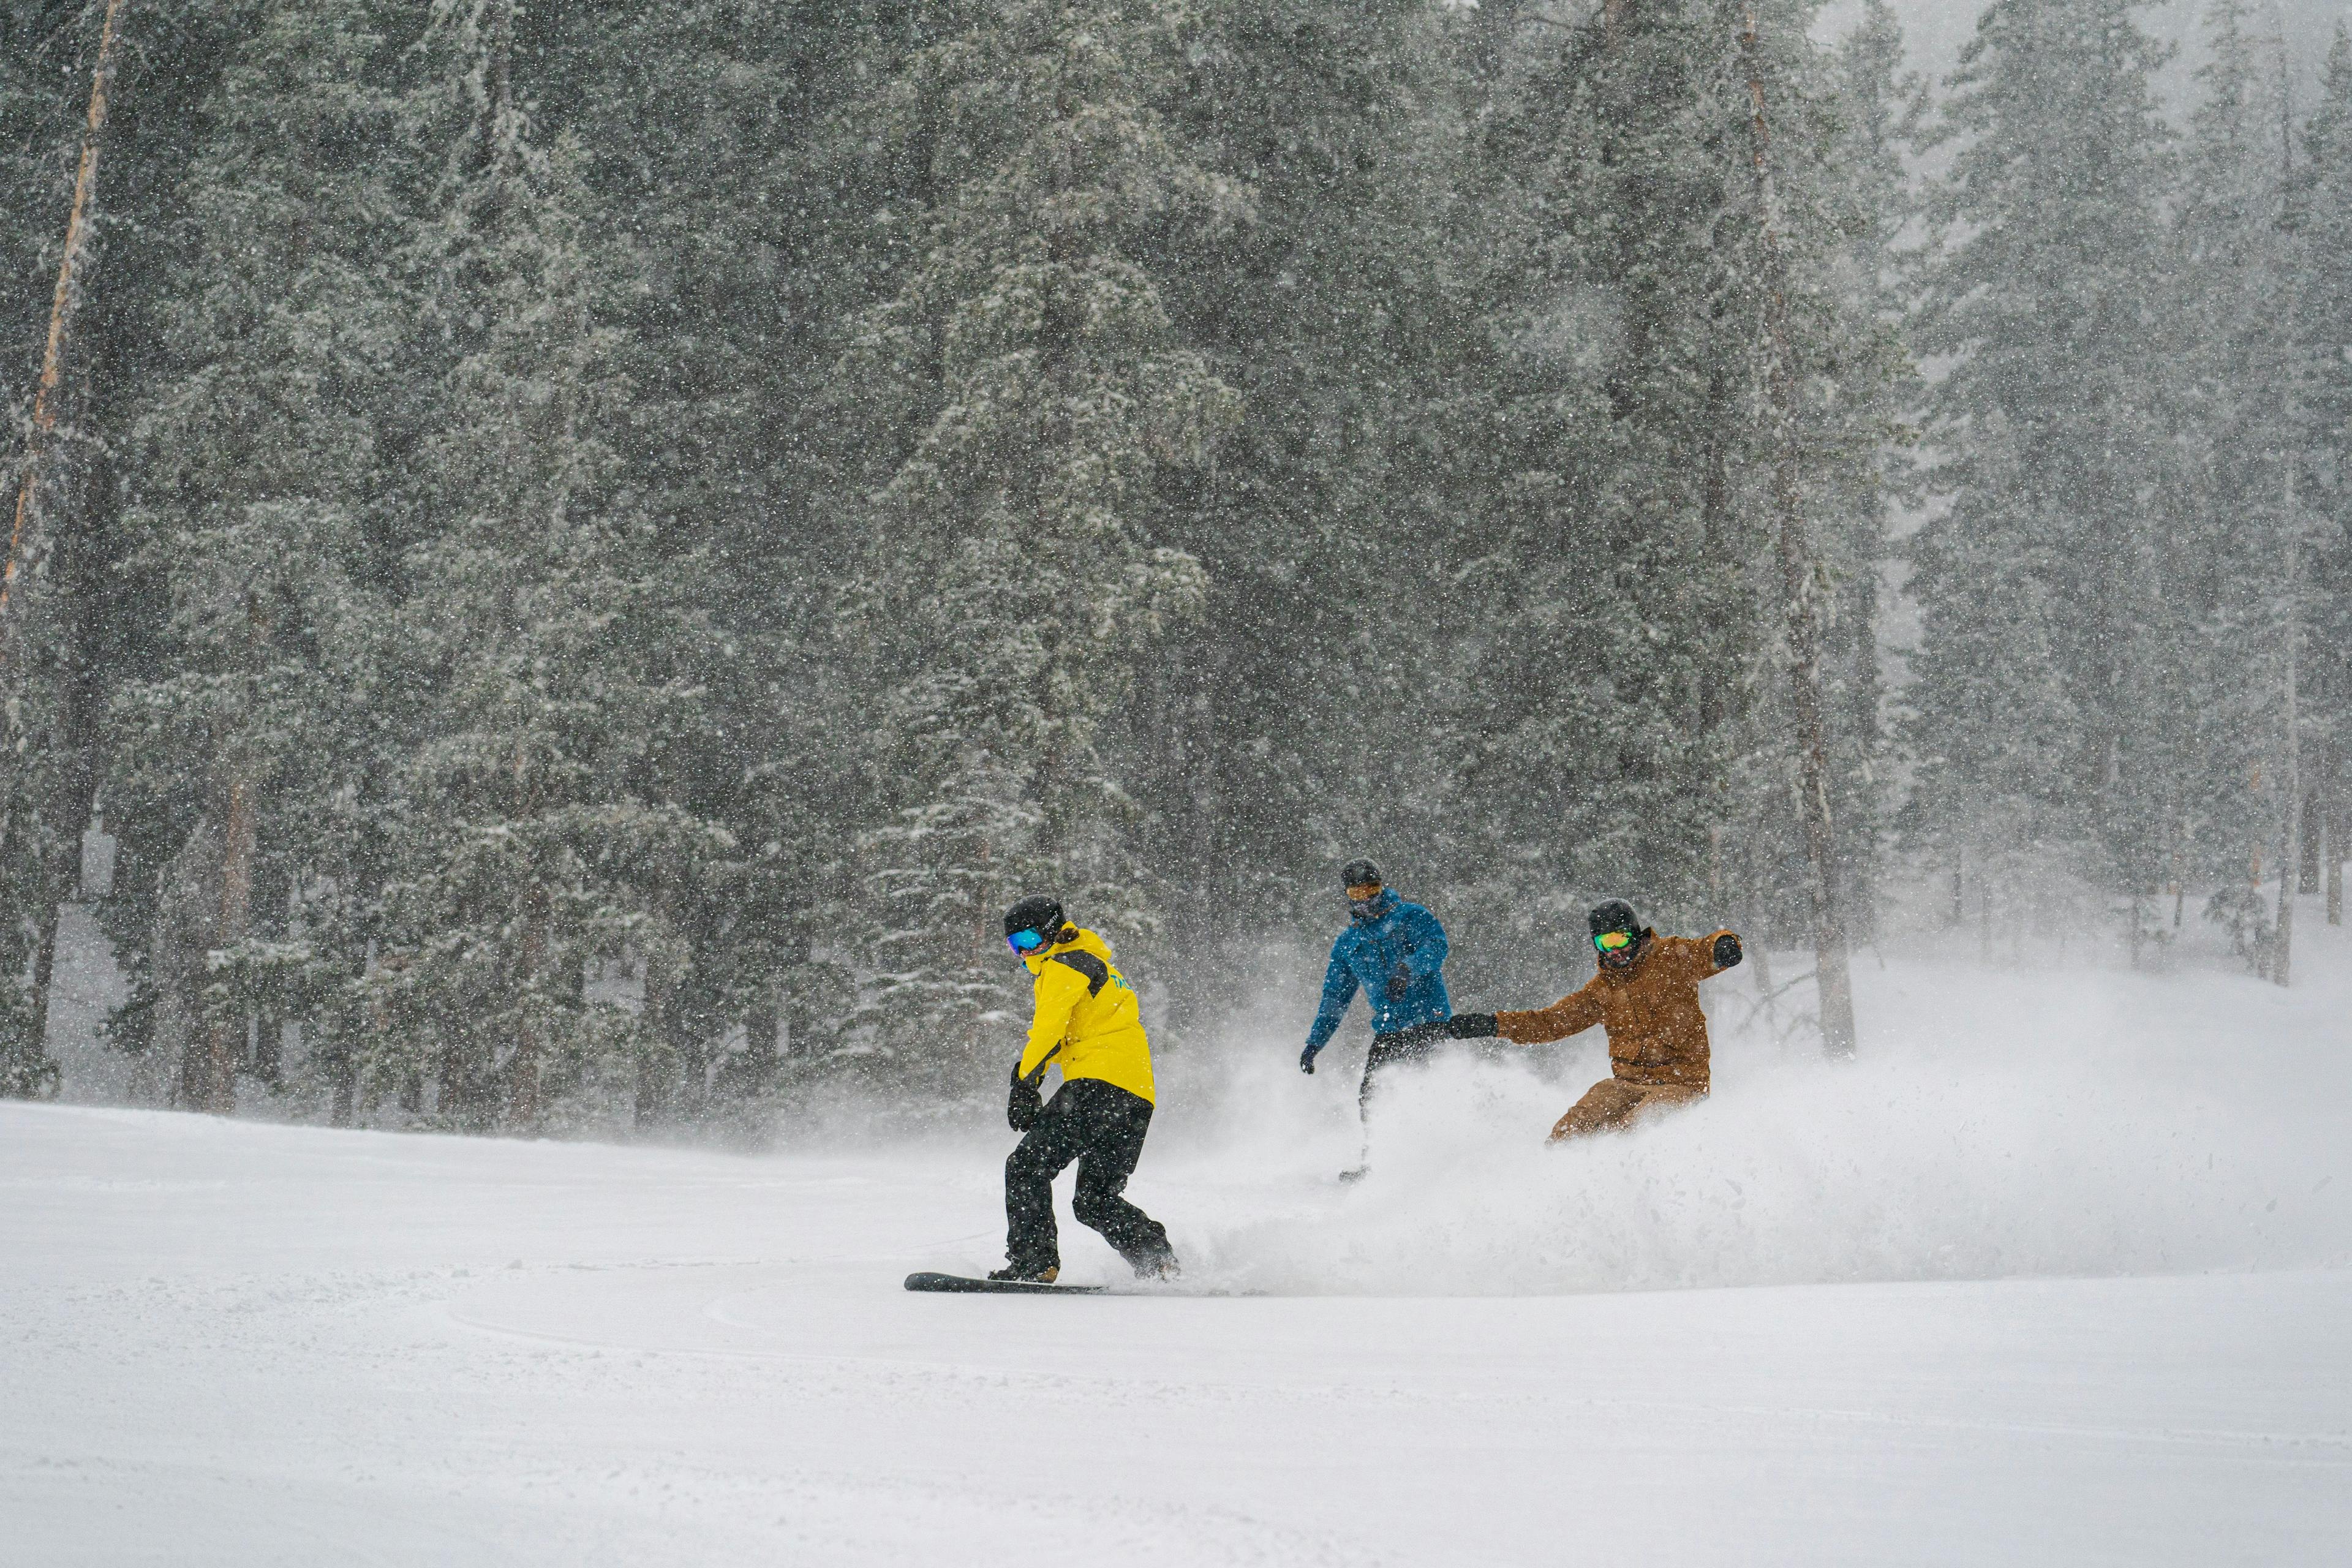 Snowboarders enjoying powder in a lesson at Taos Ski Valley.